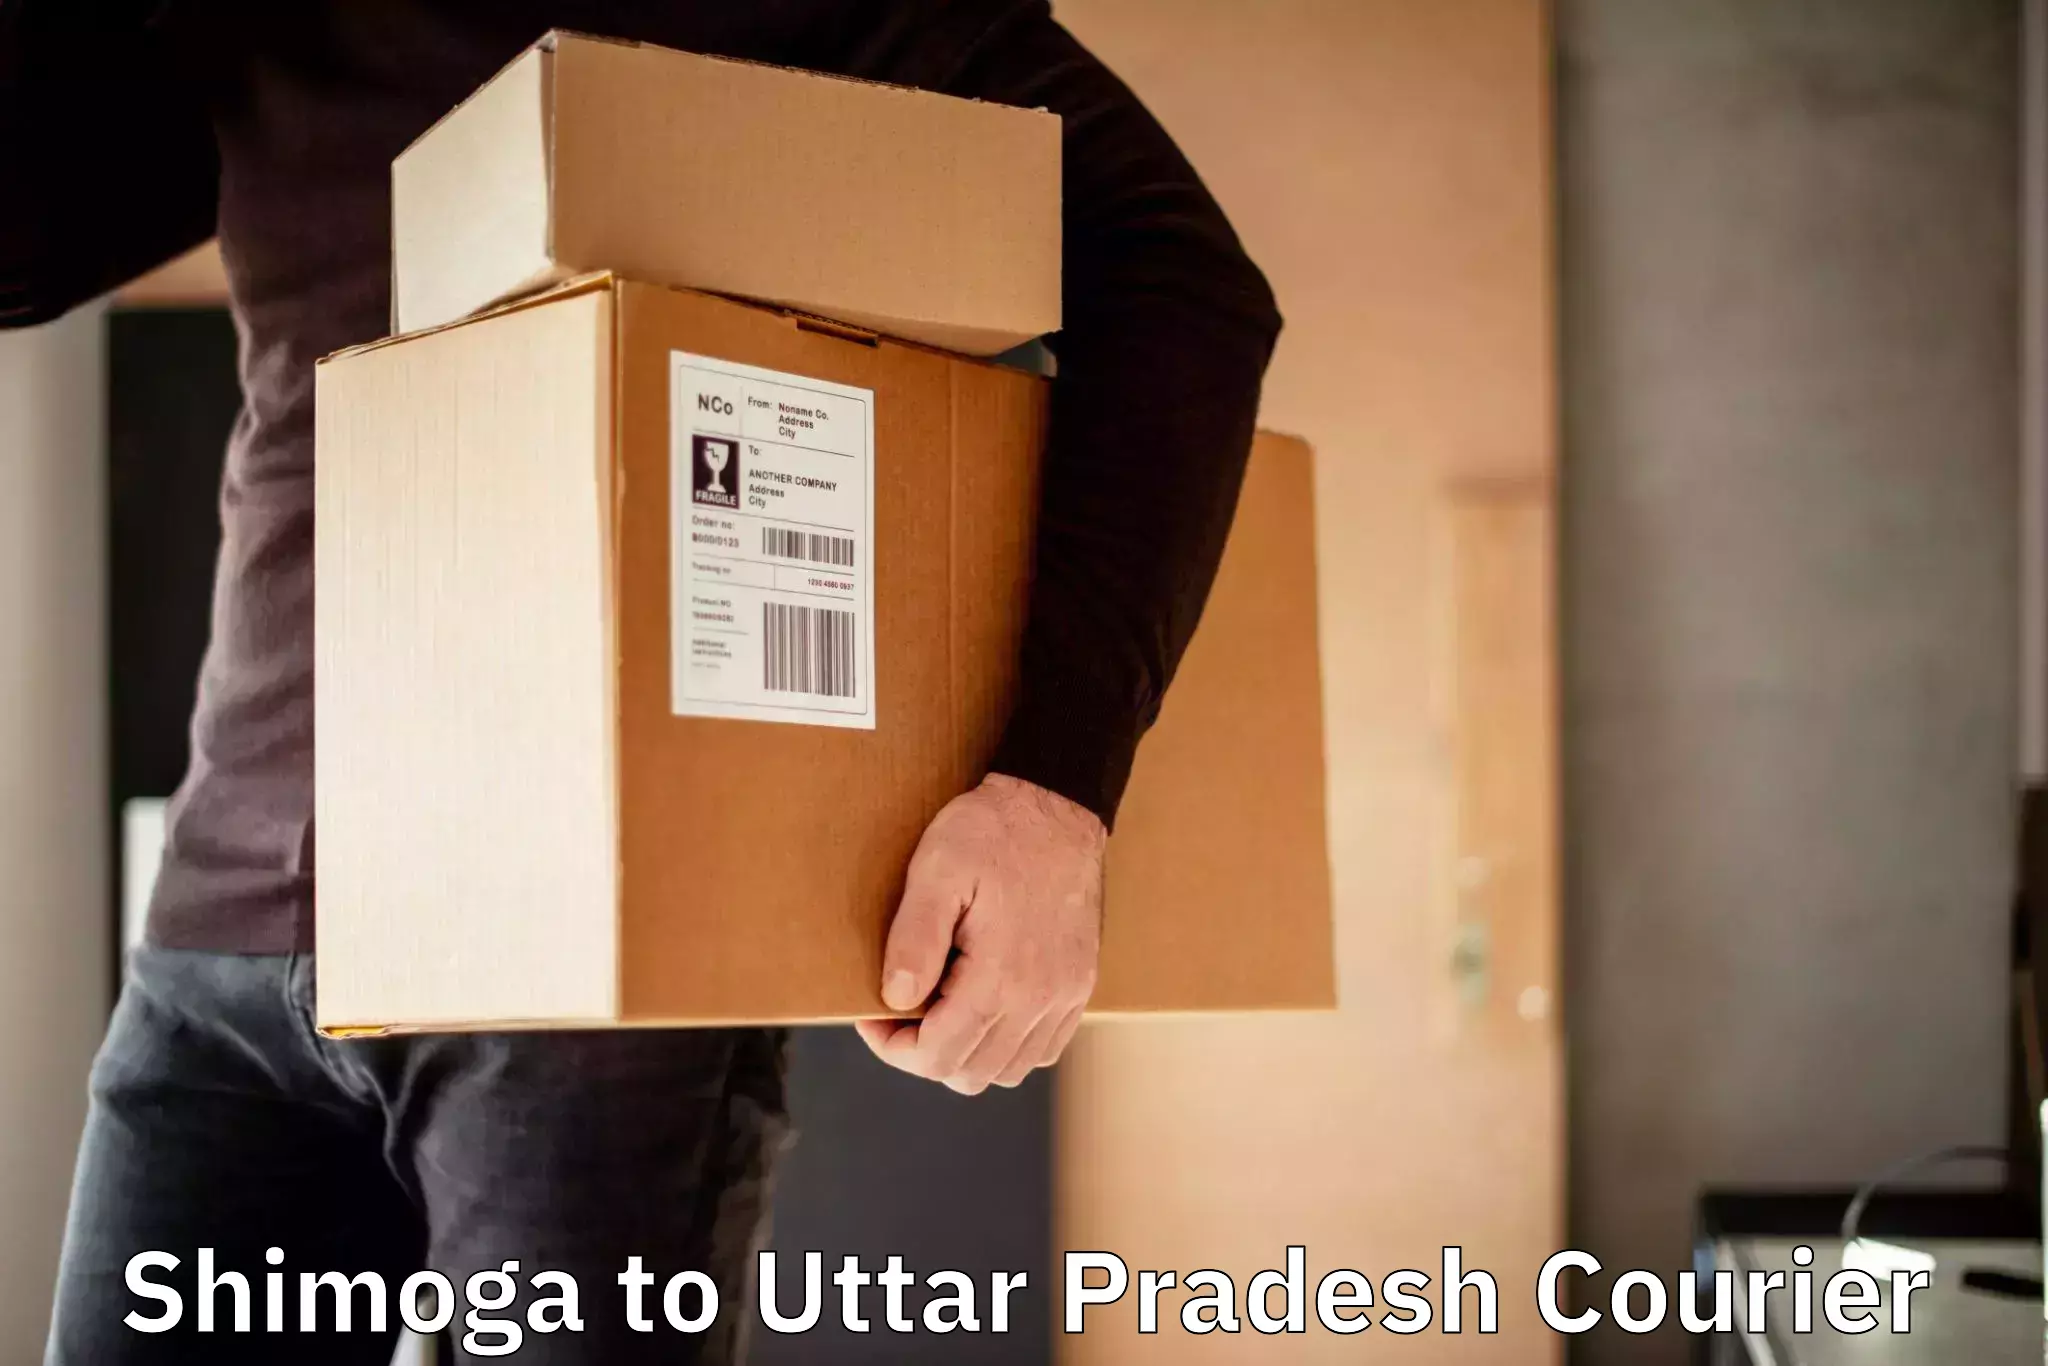 Courier service booking Shimoga to Madhuban